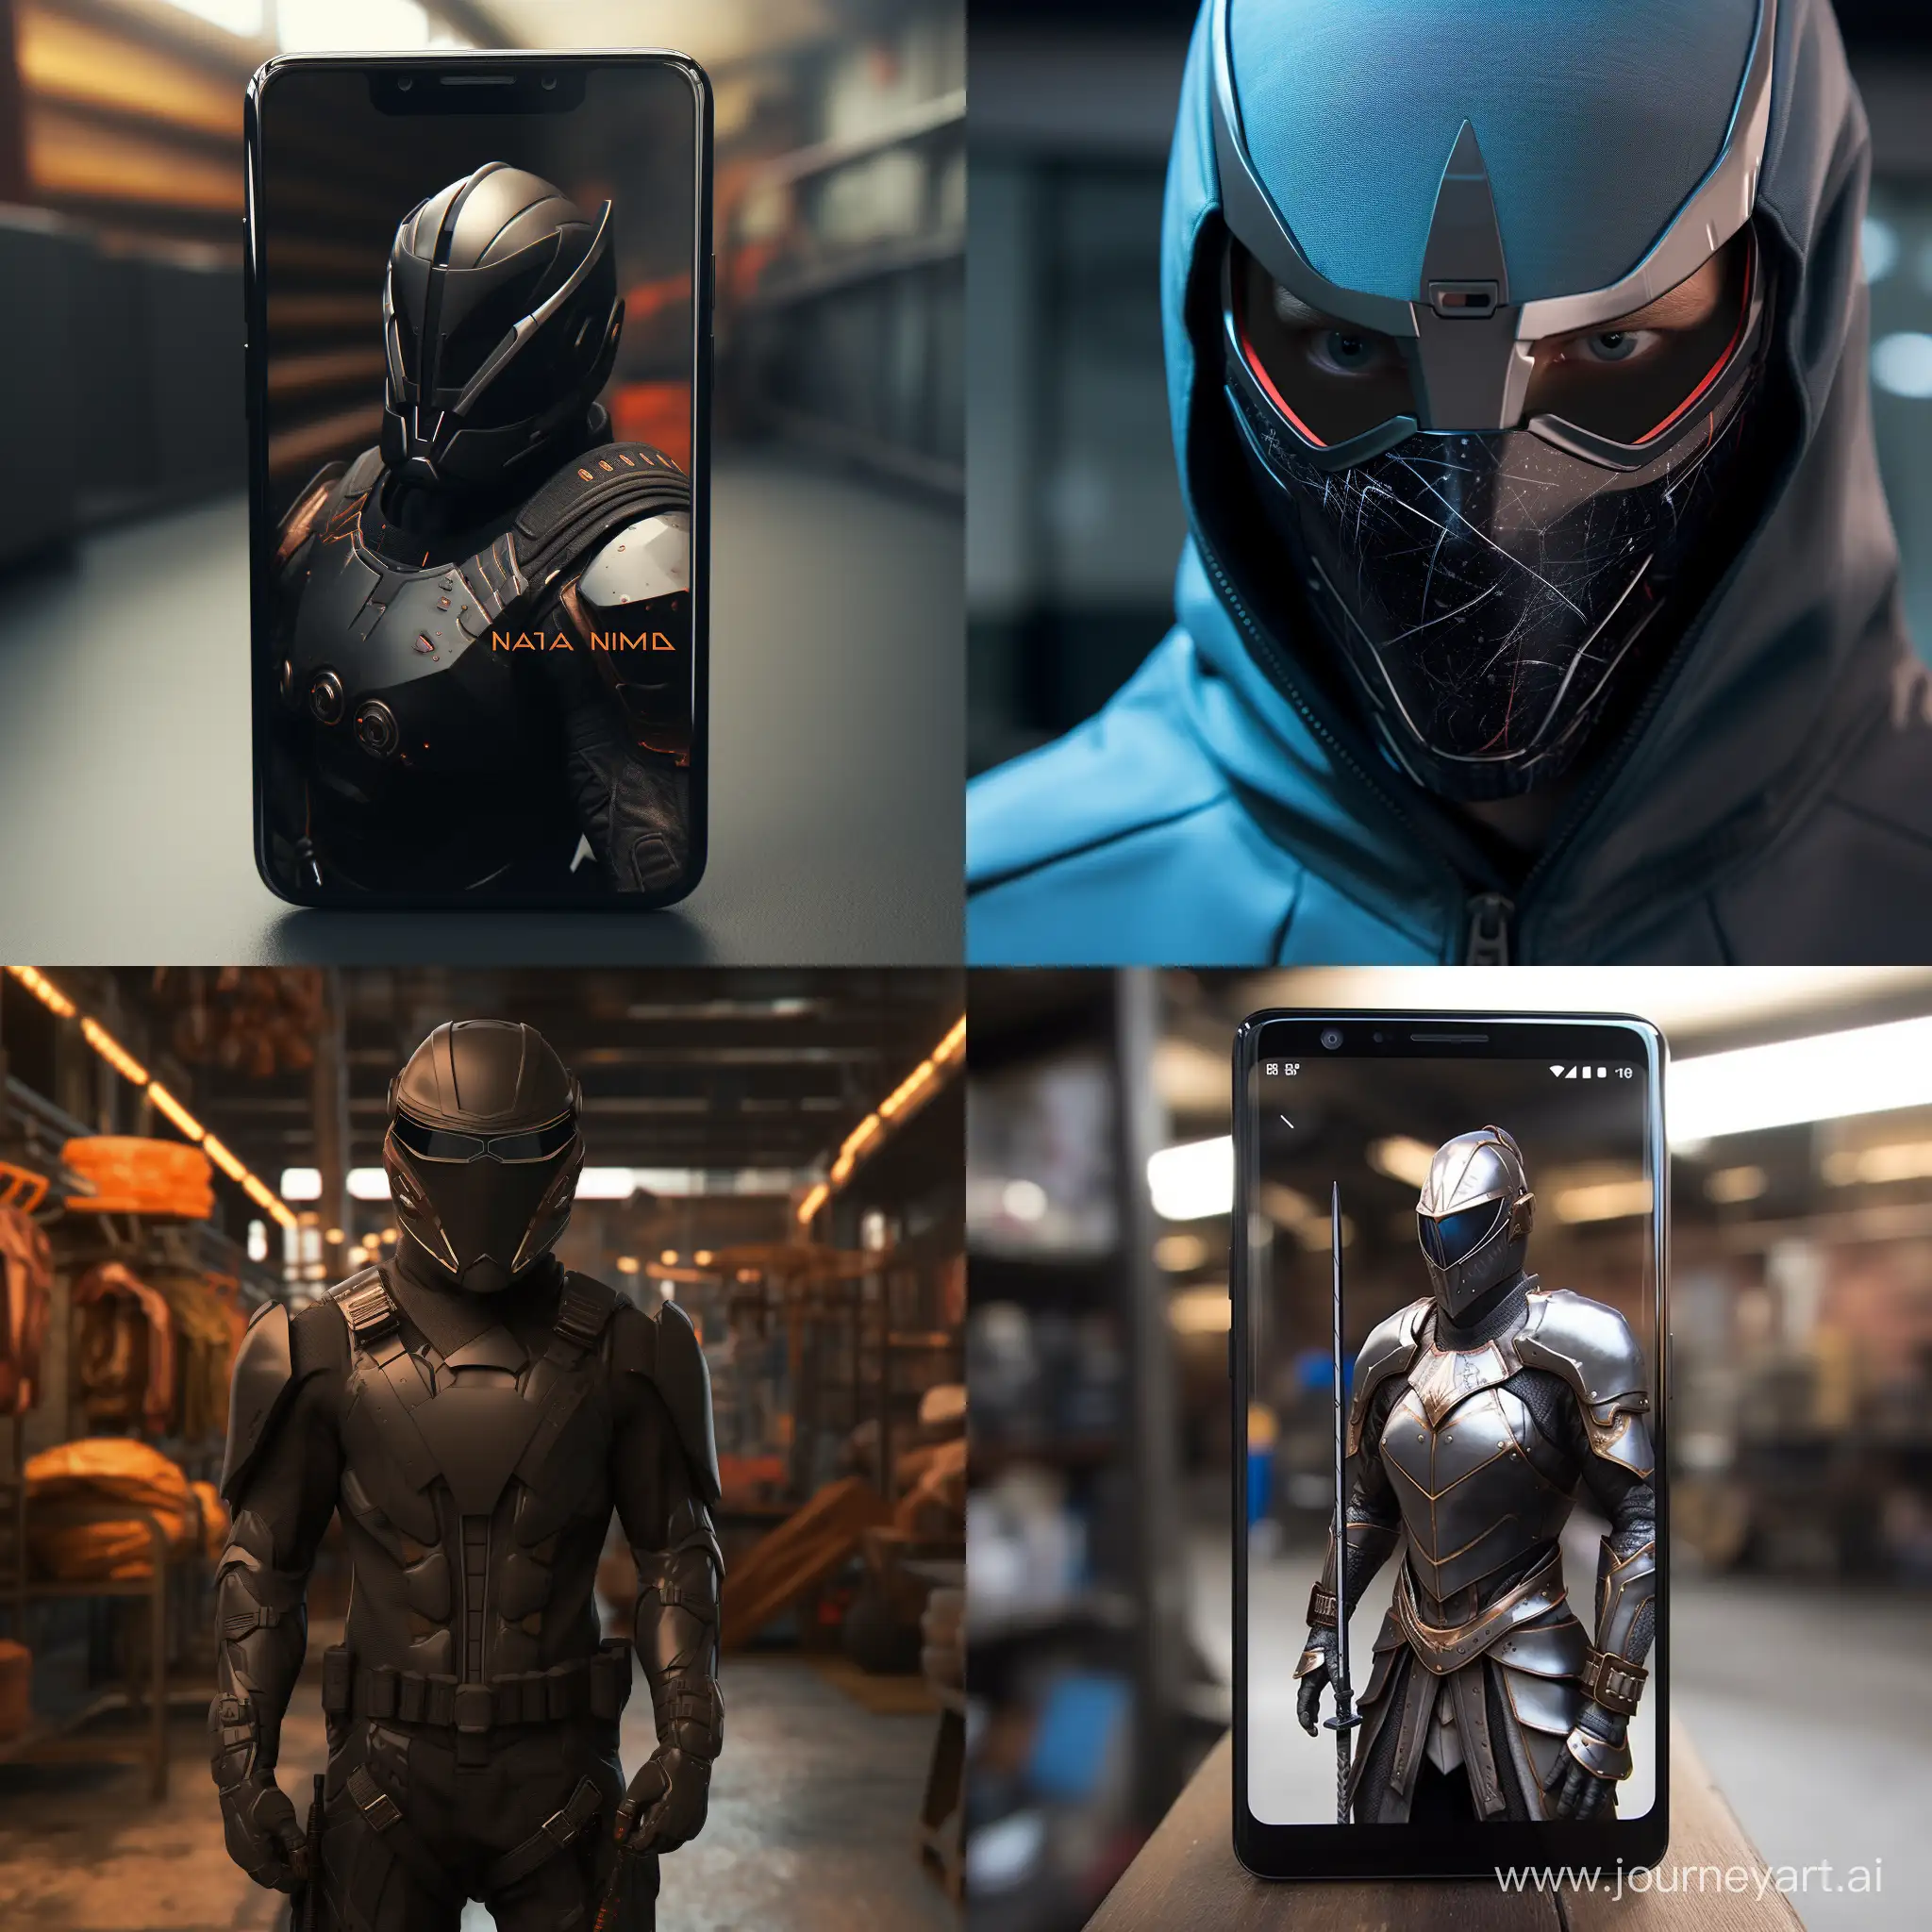 Cinematic-Android-Ninja-in-HyperDetailed-Real-Photo-Maximum-Quality-Image